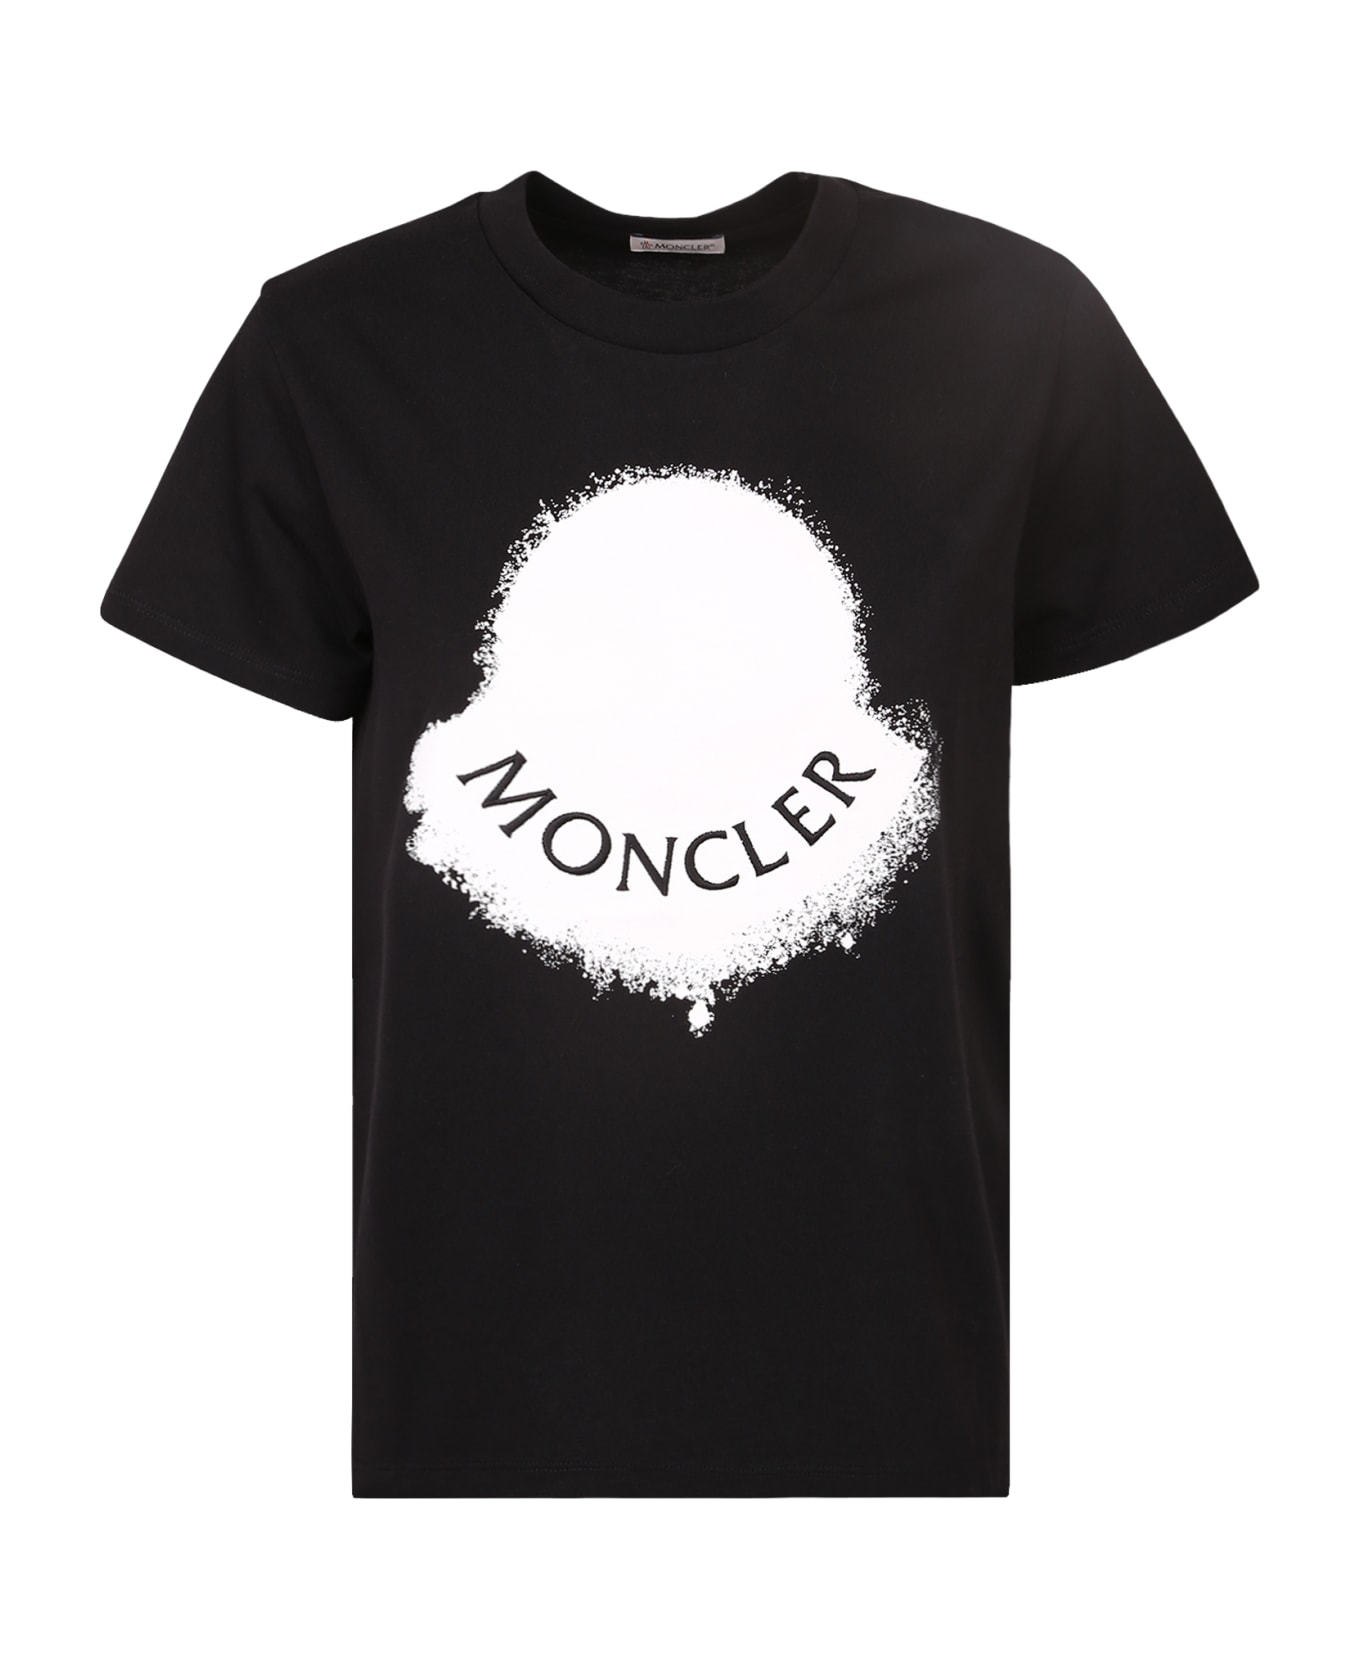 Moncler T-shirt Made Of Cotton Jersey - 999 Tシャツ